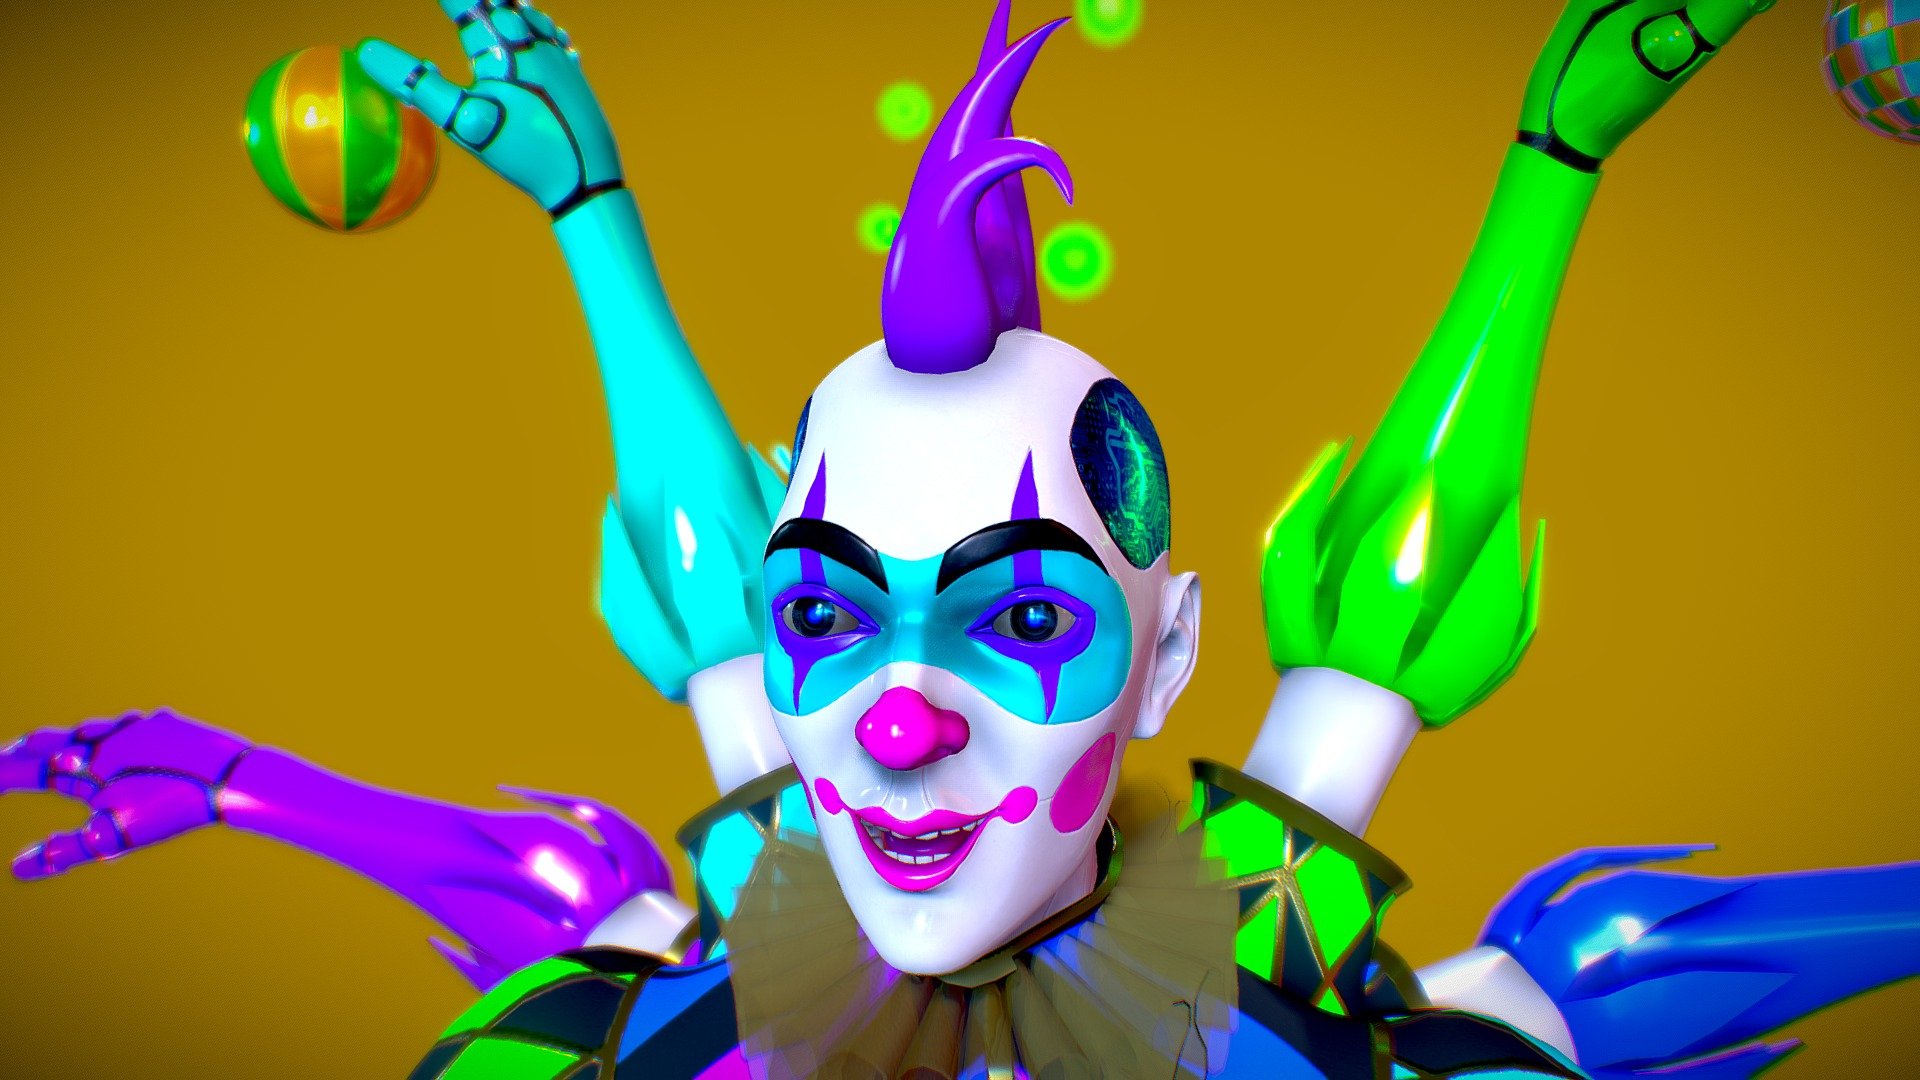 Hi guys, I loved to make this character, It was sculpted within Zbrush, retopologized in Maya and textures where painted within substance, hope you like it. I looked for much references of clowns, harlequins, cyberpunk aesthetics, and his face was very influenced by the Ghost In The Shell Geisha. ;) - Sci Fi - Clown - 3D model by AndrewMZcroft 3d model